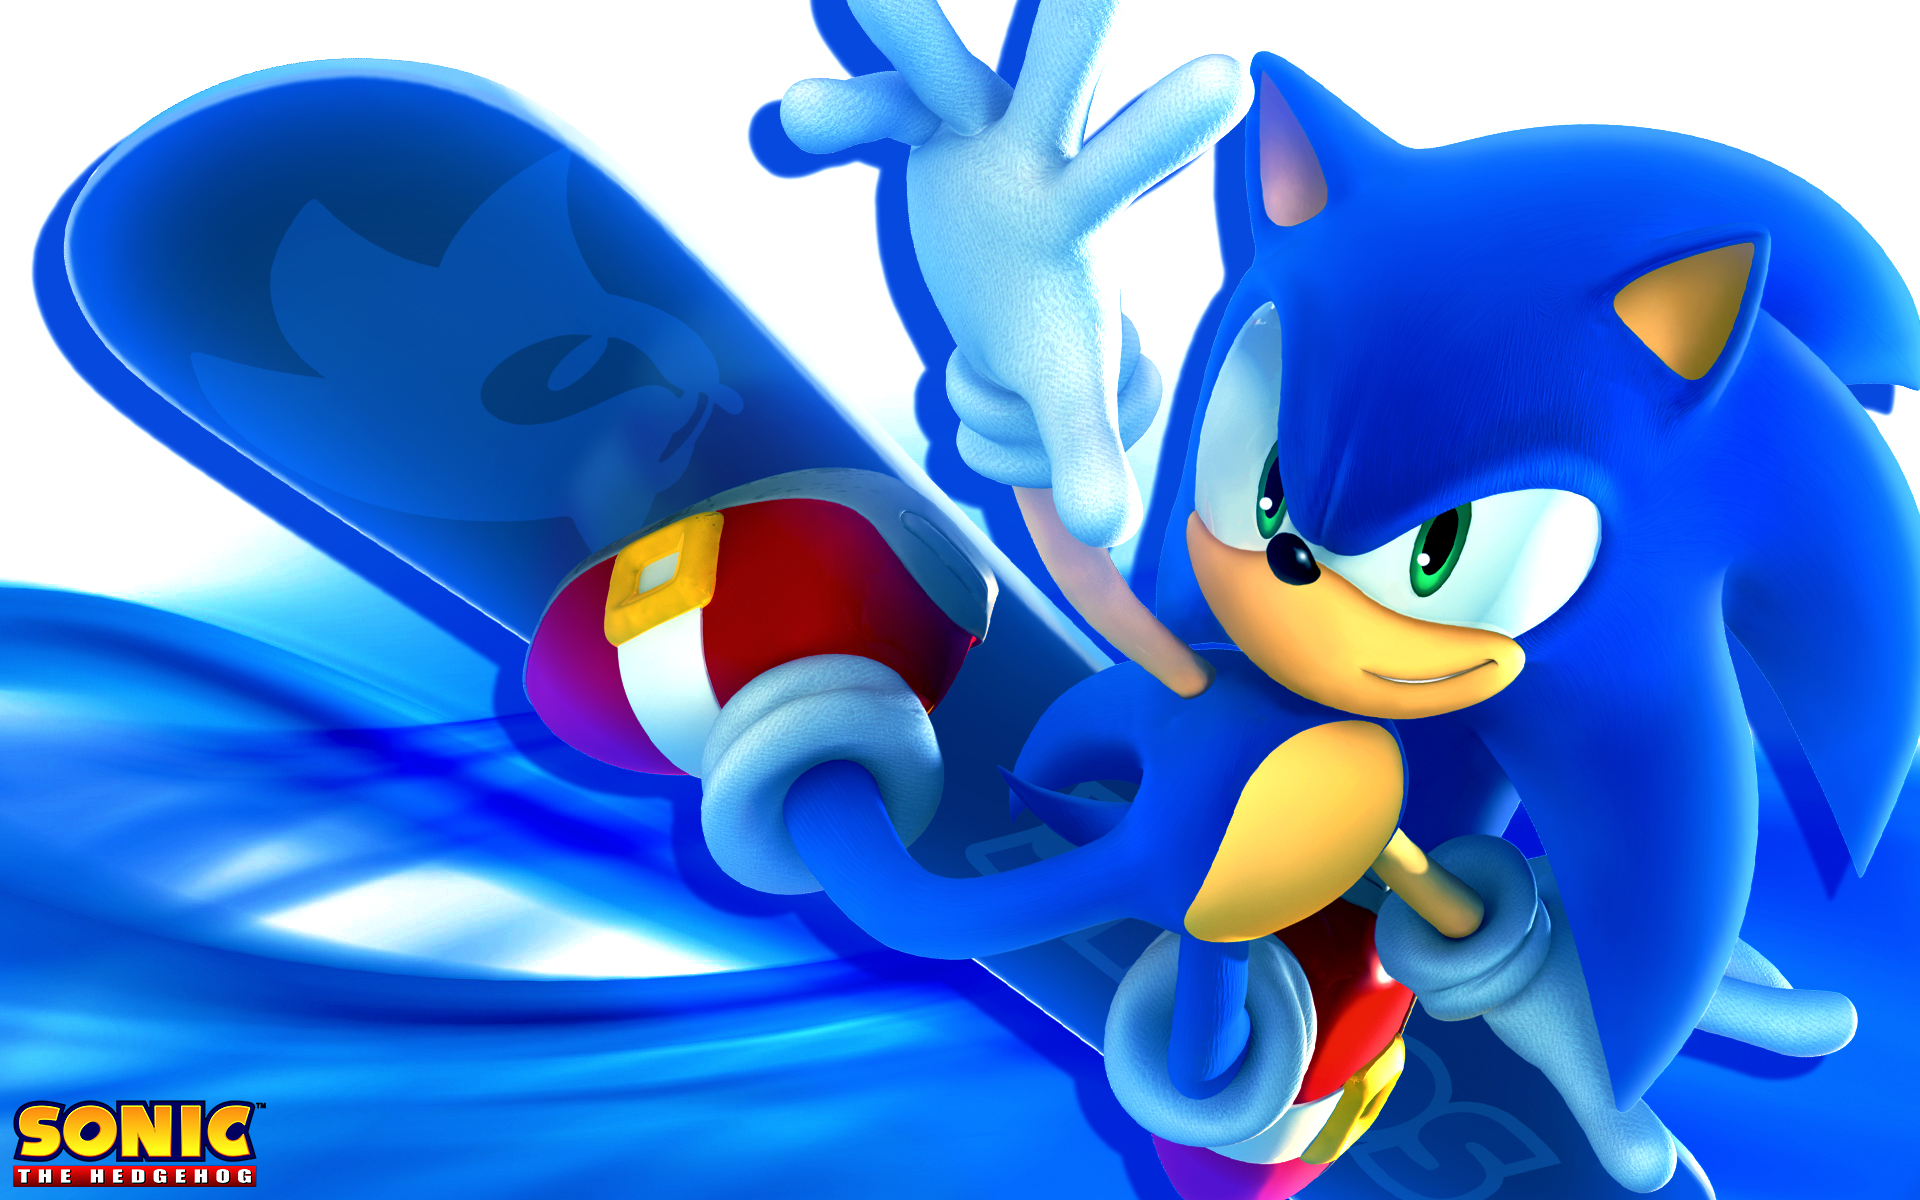 Sonic The Hedgehog Backgrounds High Quality 